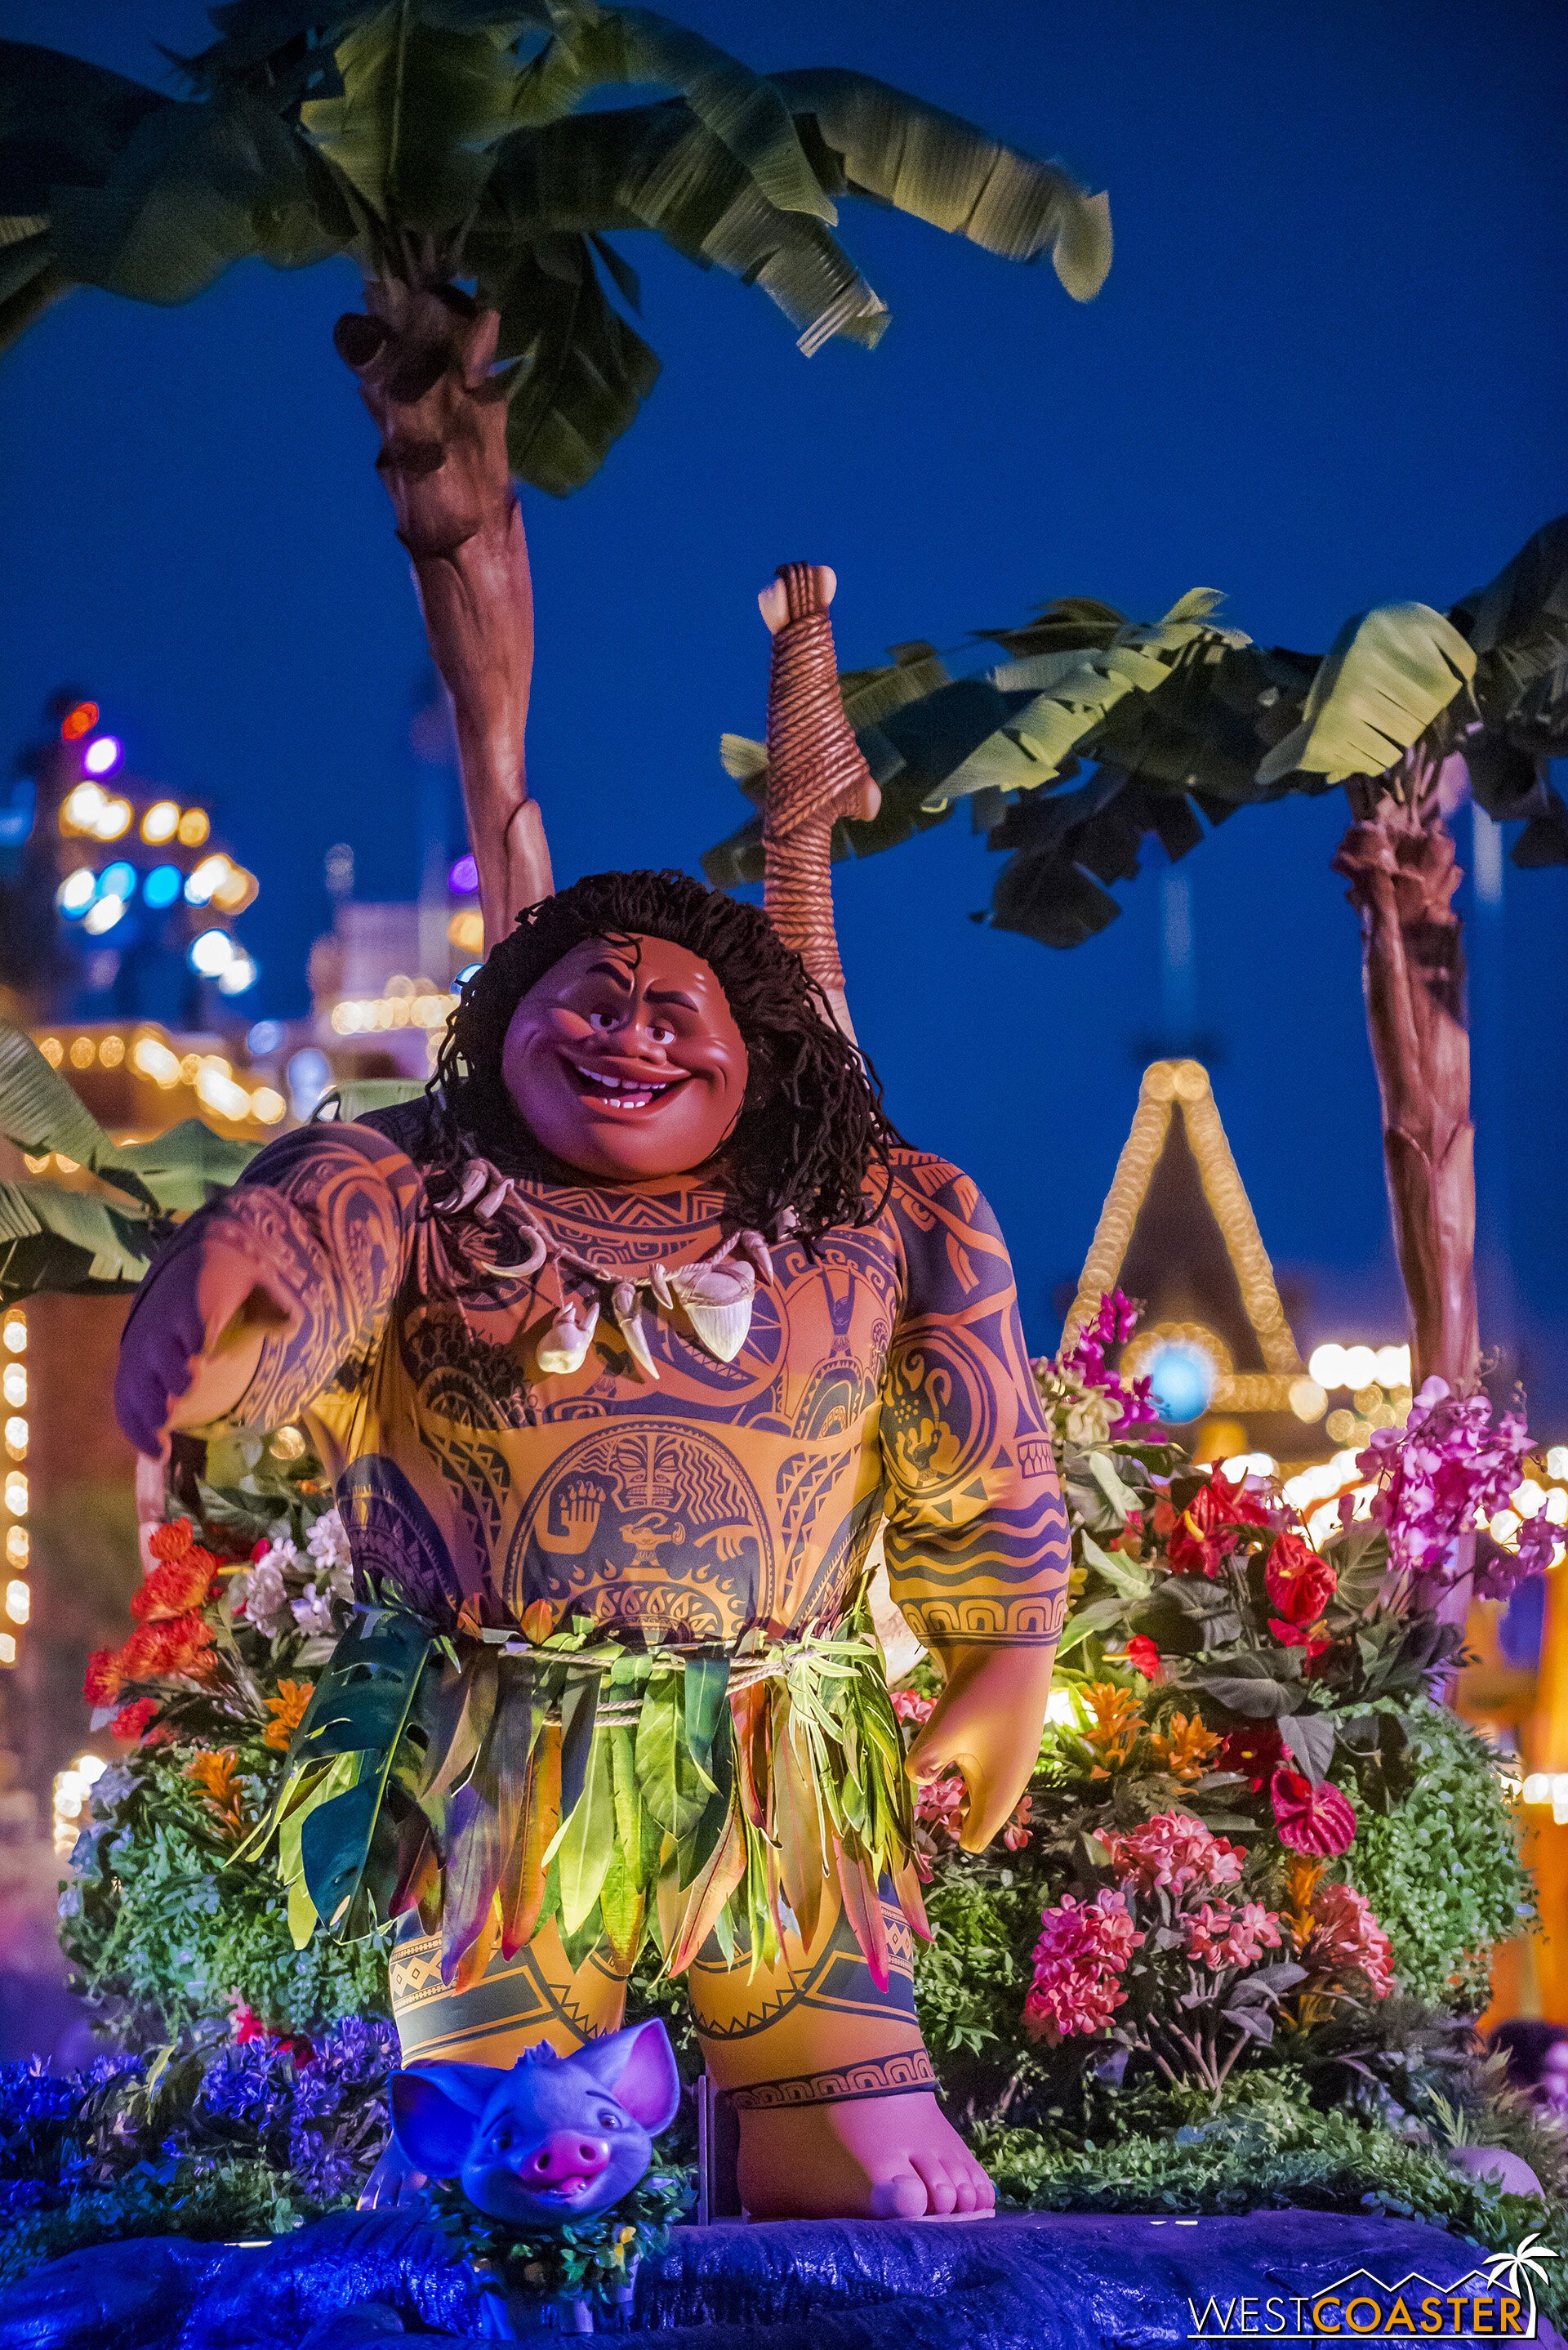  The fog that emanates from Maui’s float is even more prominent at night, as are the colorful, glowing rock symbols. 